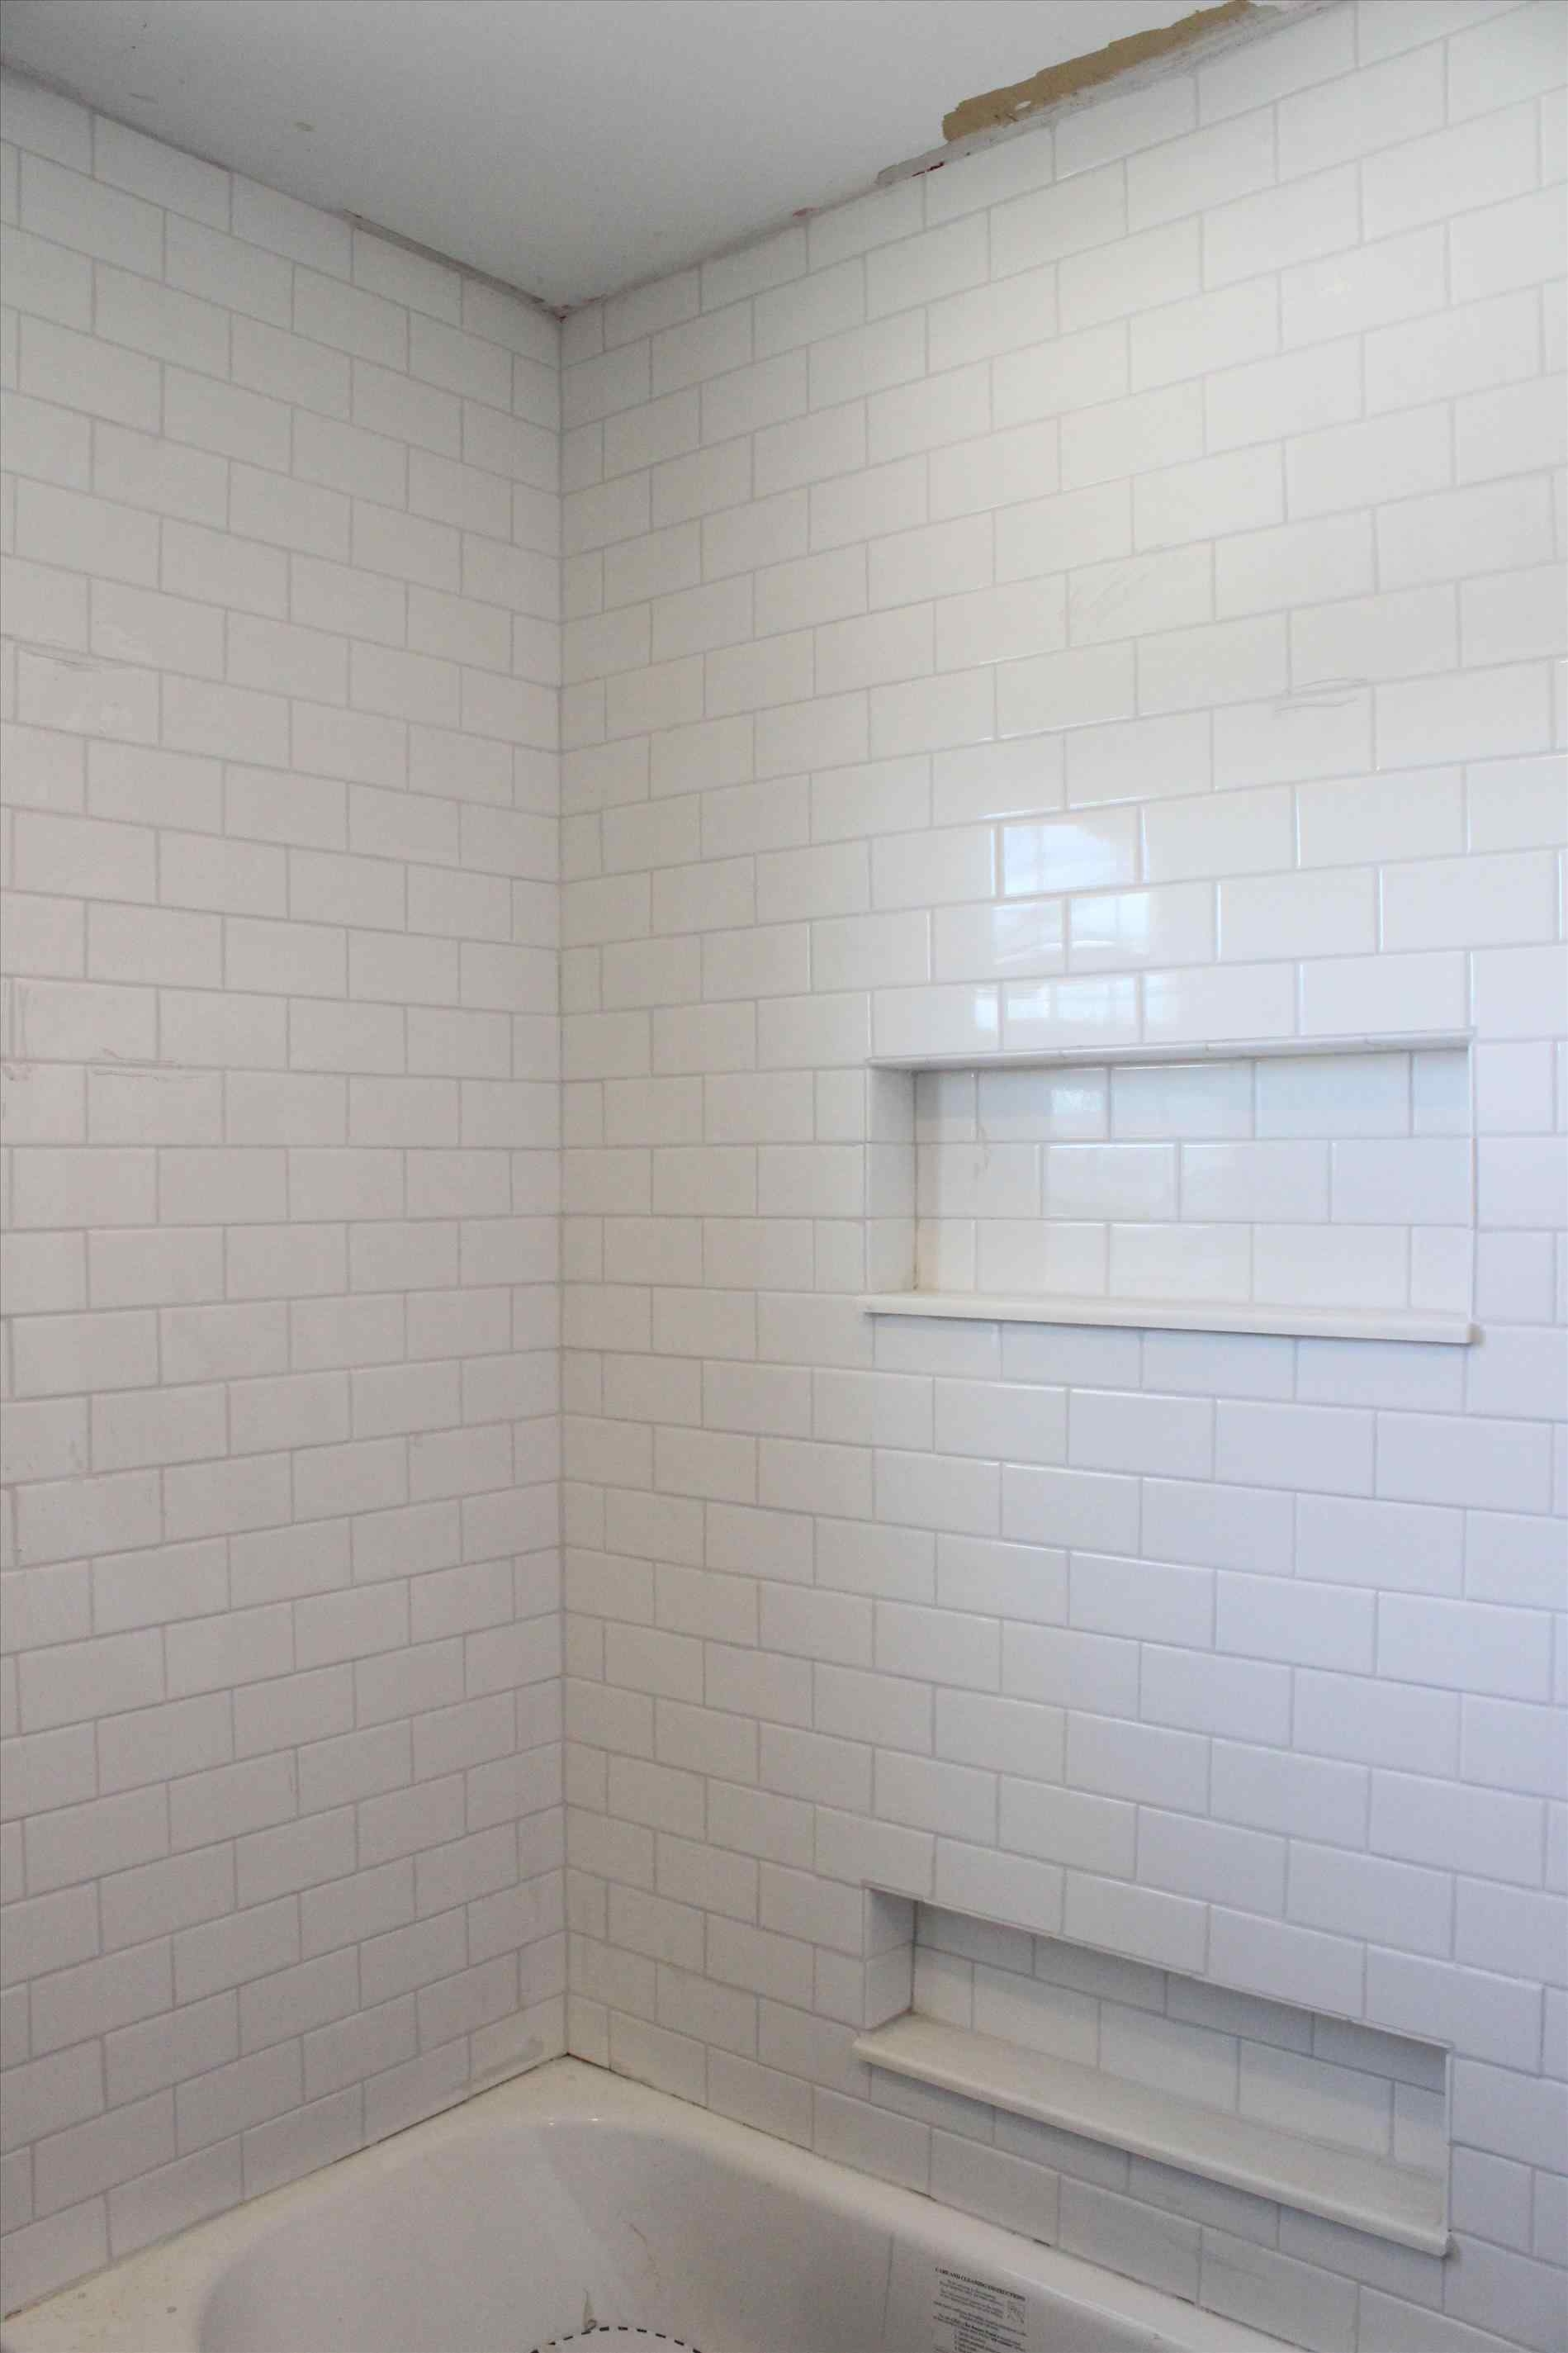 Permalink to Subway Tile On Ceiling